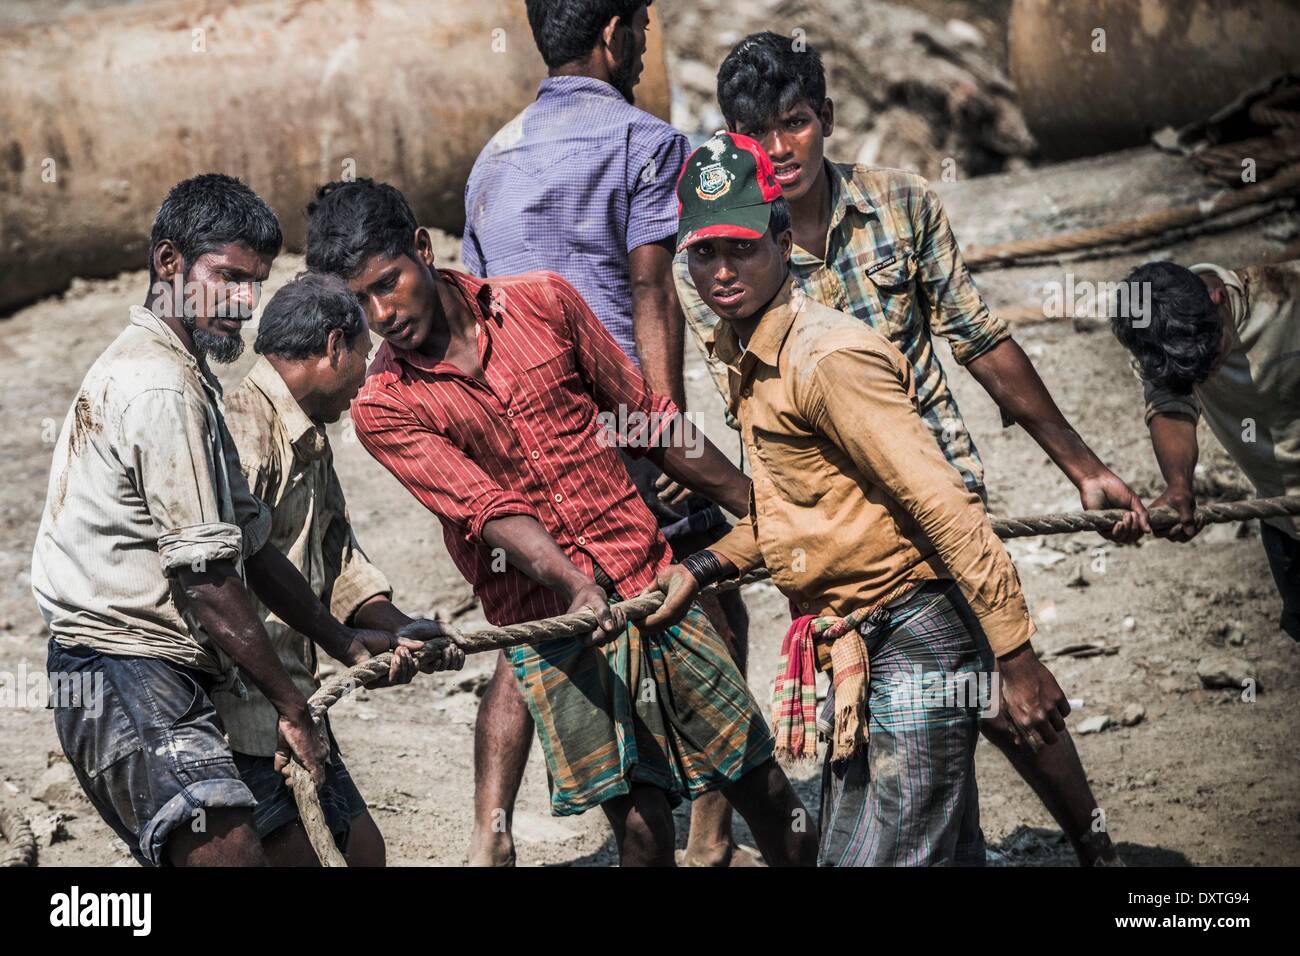 Workers are dragging a heavy pull rope in a shipbreaking yard in Chittagong. Once the beach at the shipwrecking places in Chittagong, Bangladesh were white and clean. Today Chittagong is partially soaked with oil and toxic mud. Chittagong is one of the wor Stock Photo